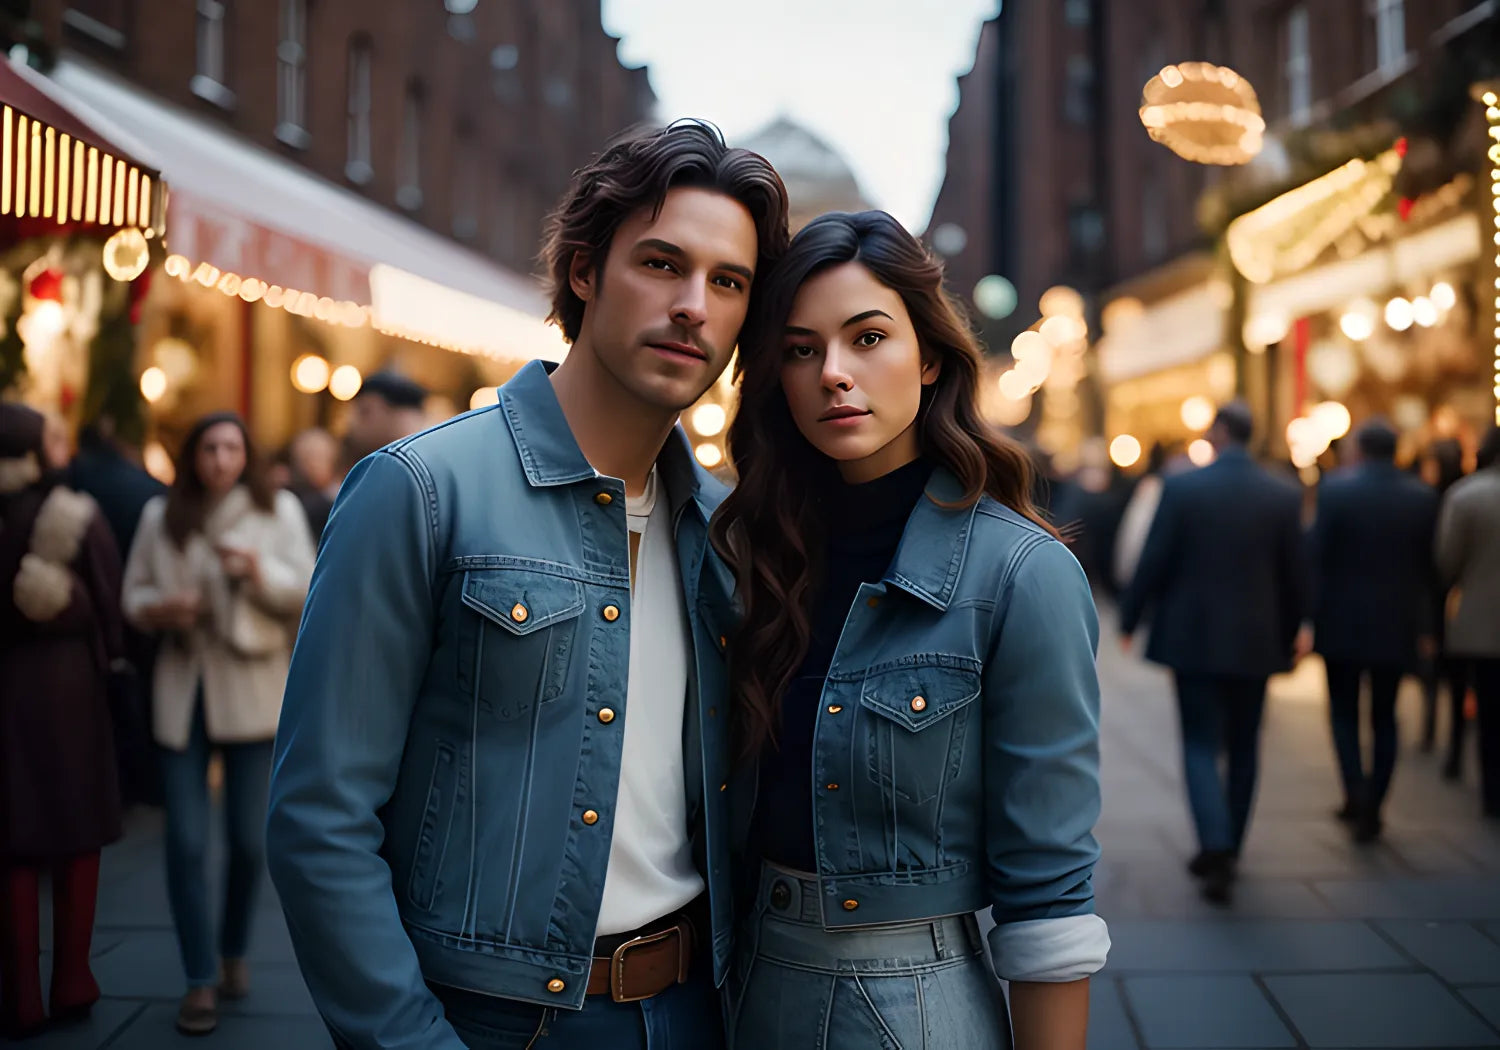 Amidst Covent Garden's Sparkling Christmas Lights, A Canadian Man Dons A Finely-Stitched Denim Jacket, While A New Zealand Woman Elegantly Pairs A Denim Blouse With A Matching Skirt. Both Intently Lock Eyes With The Camera, Their Denim Attire, Now Highlighted With Radiant Red, Evoking A Festive Charm.